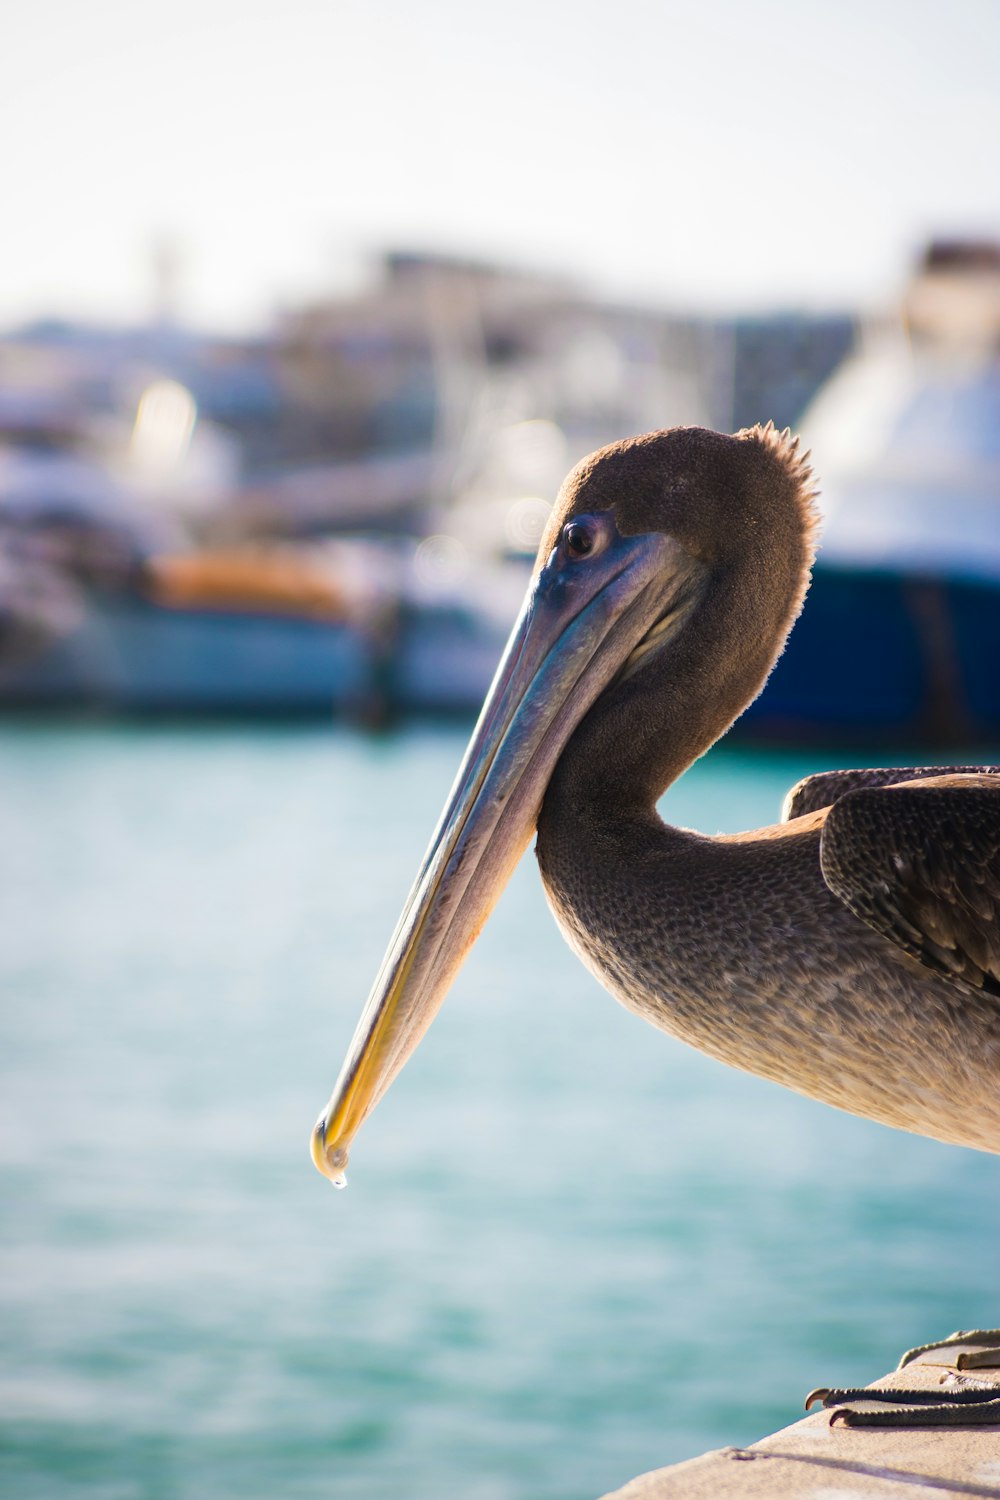 a pelican sitting on a ledge near a body of water